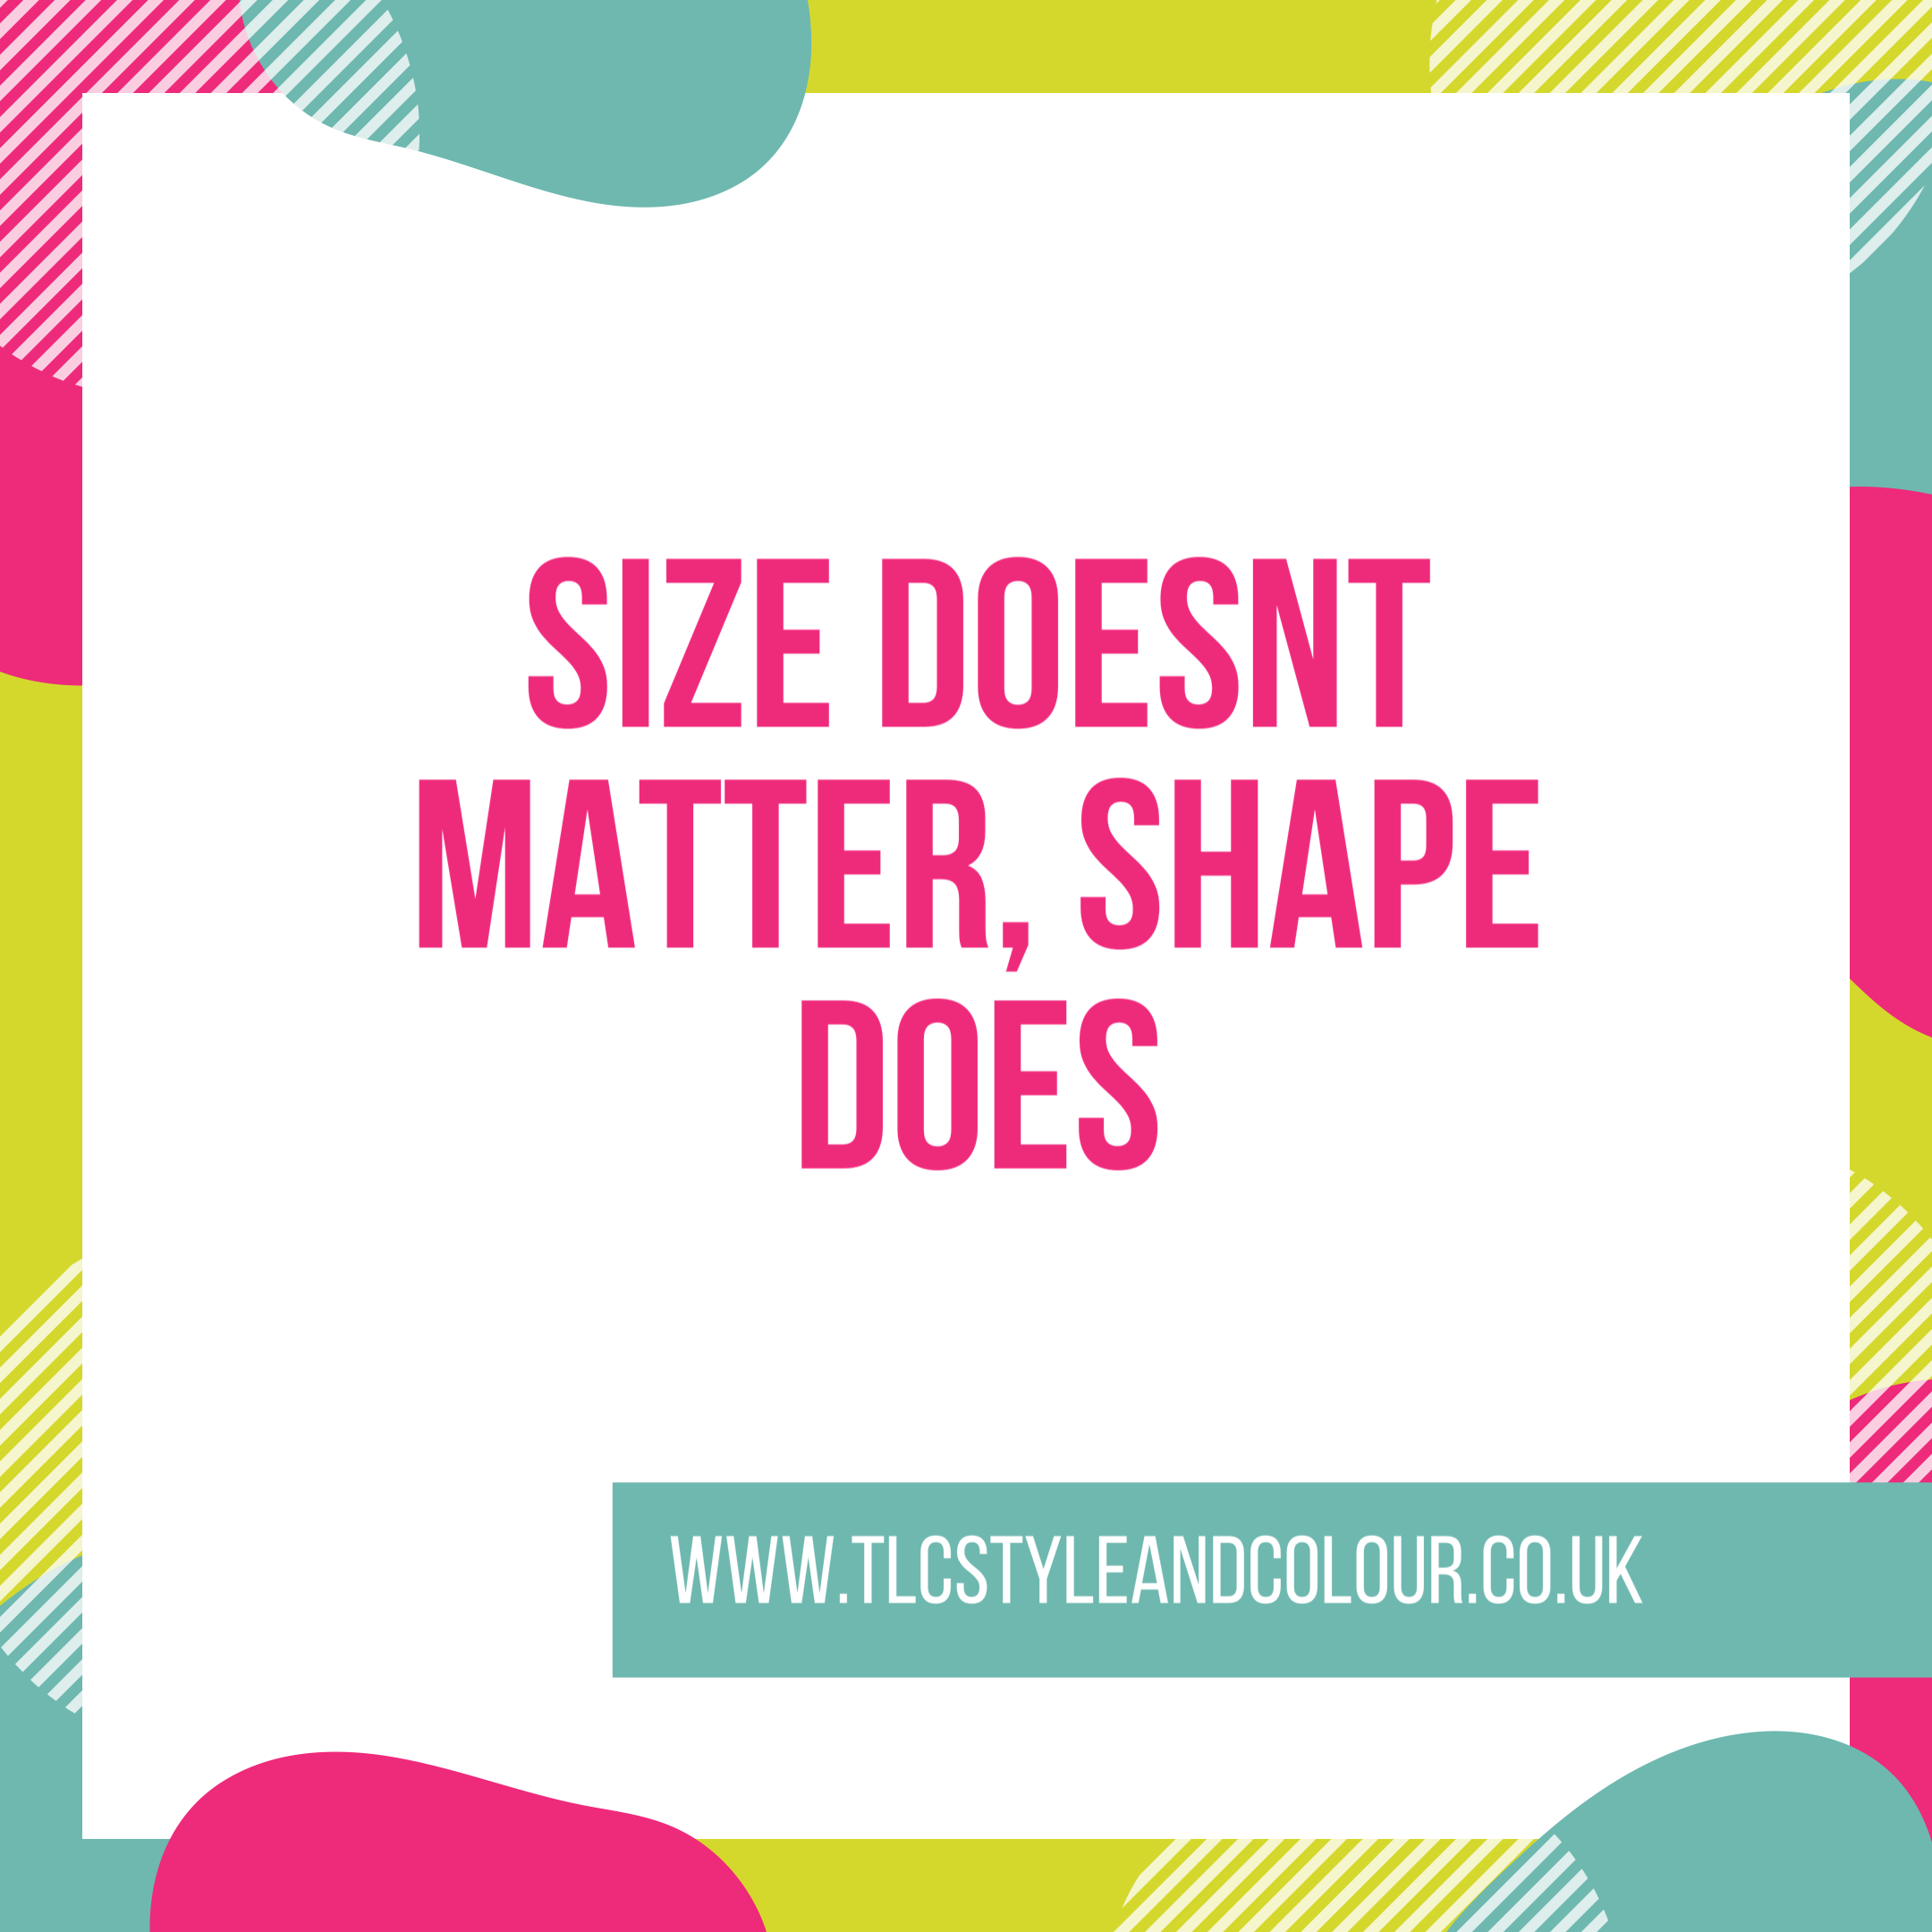 Size doesn’t matter shape does